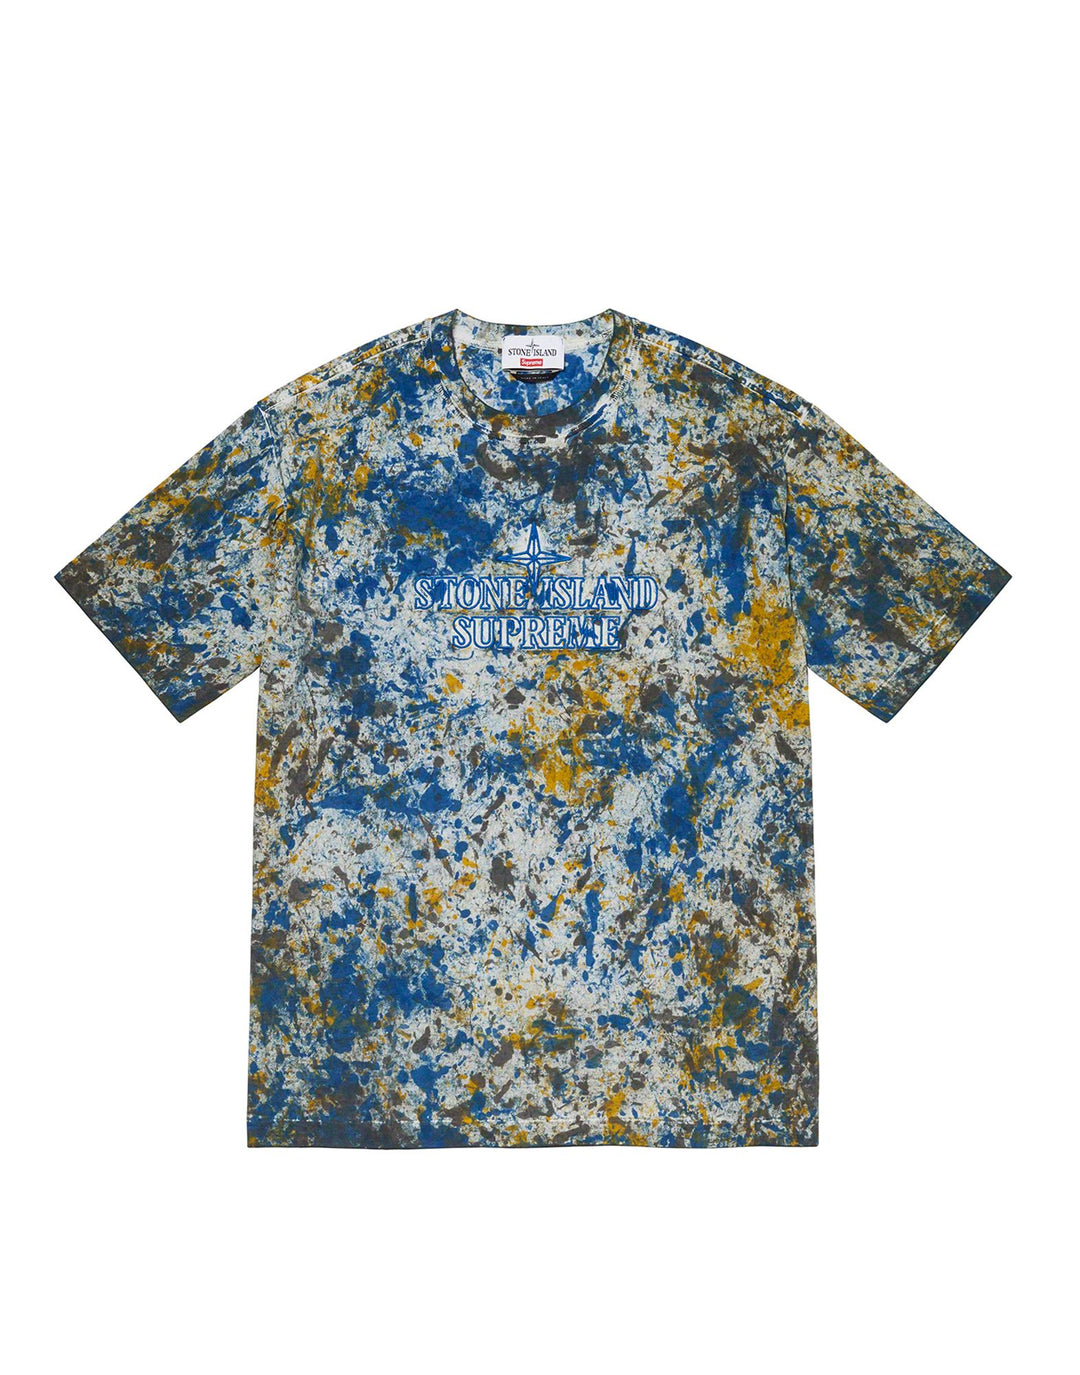 201S2 PAINTBALL CAMOUFLAGE COTTON JERSEY STONE ISLAND/SUPREME®